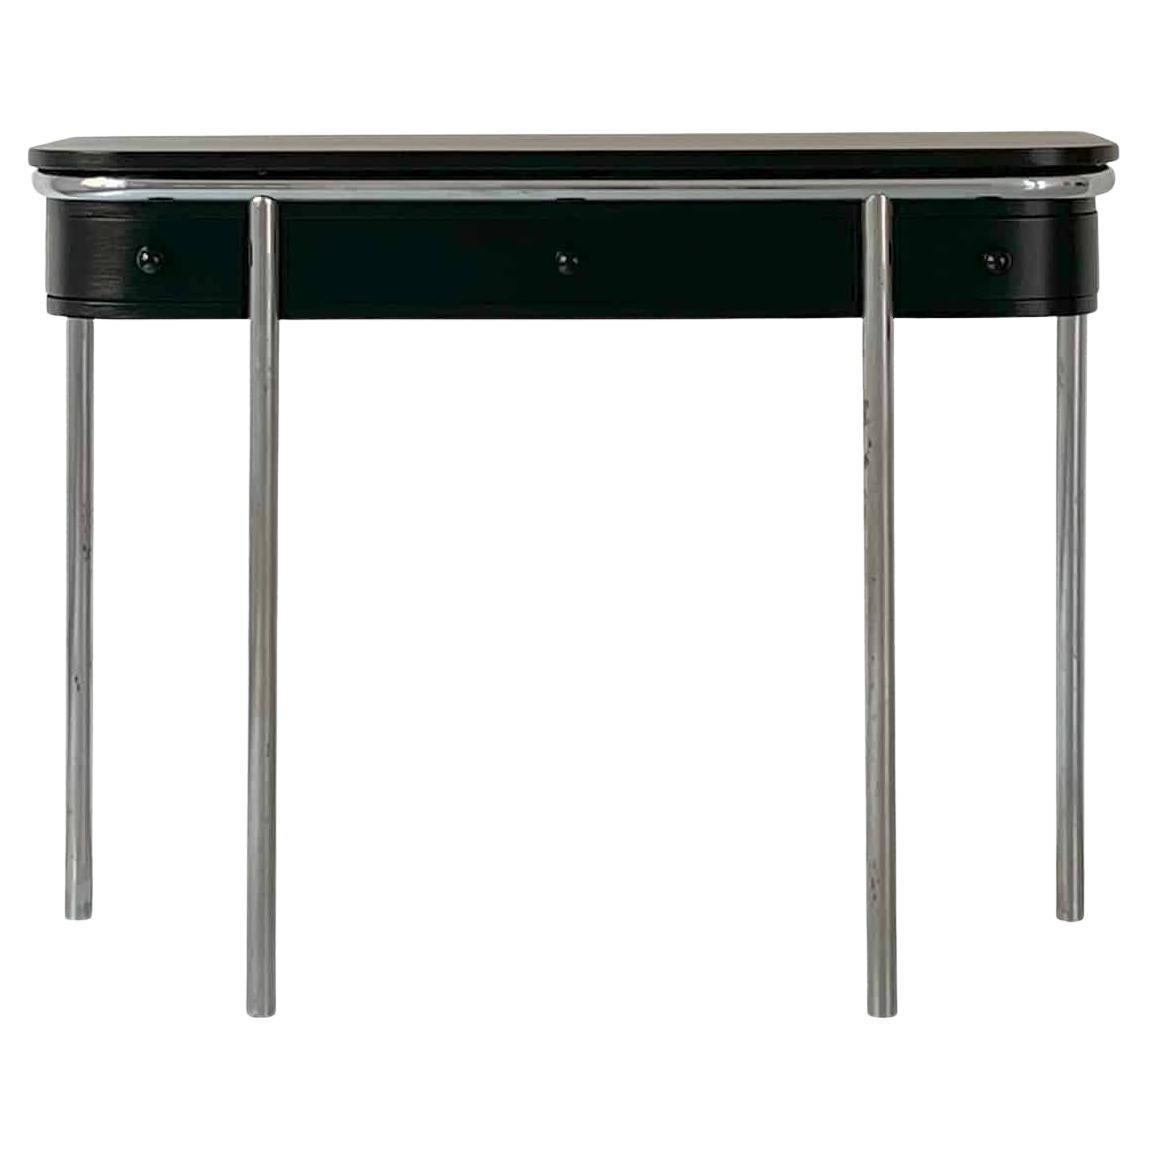 Pauli Blomstedt Modernist Console Table in Chrome and Wood, 1930s